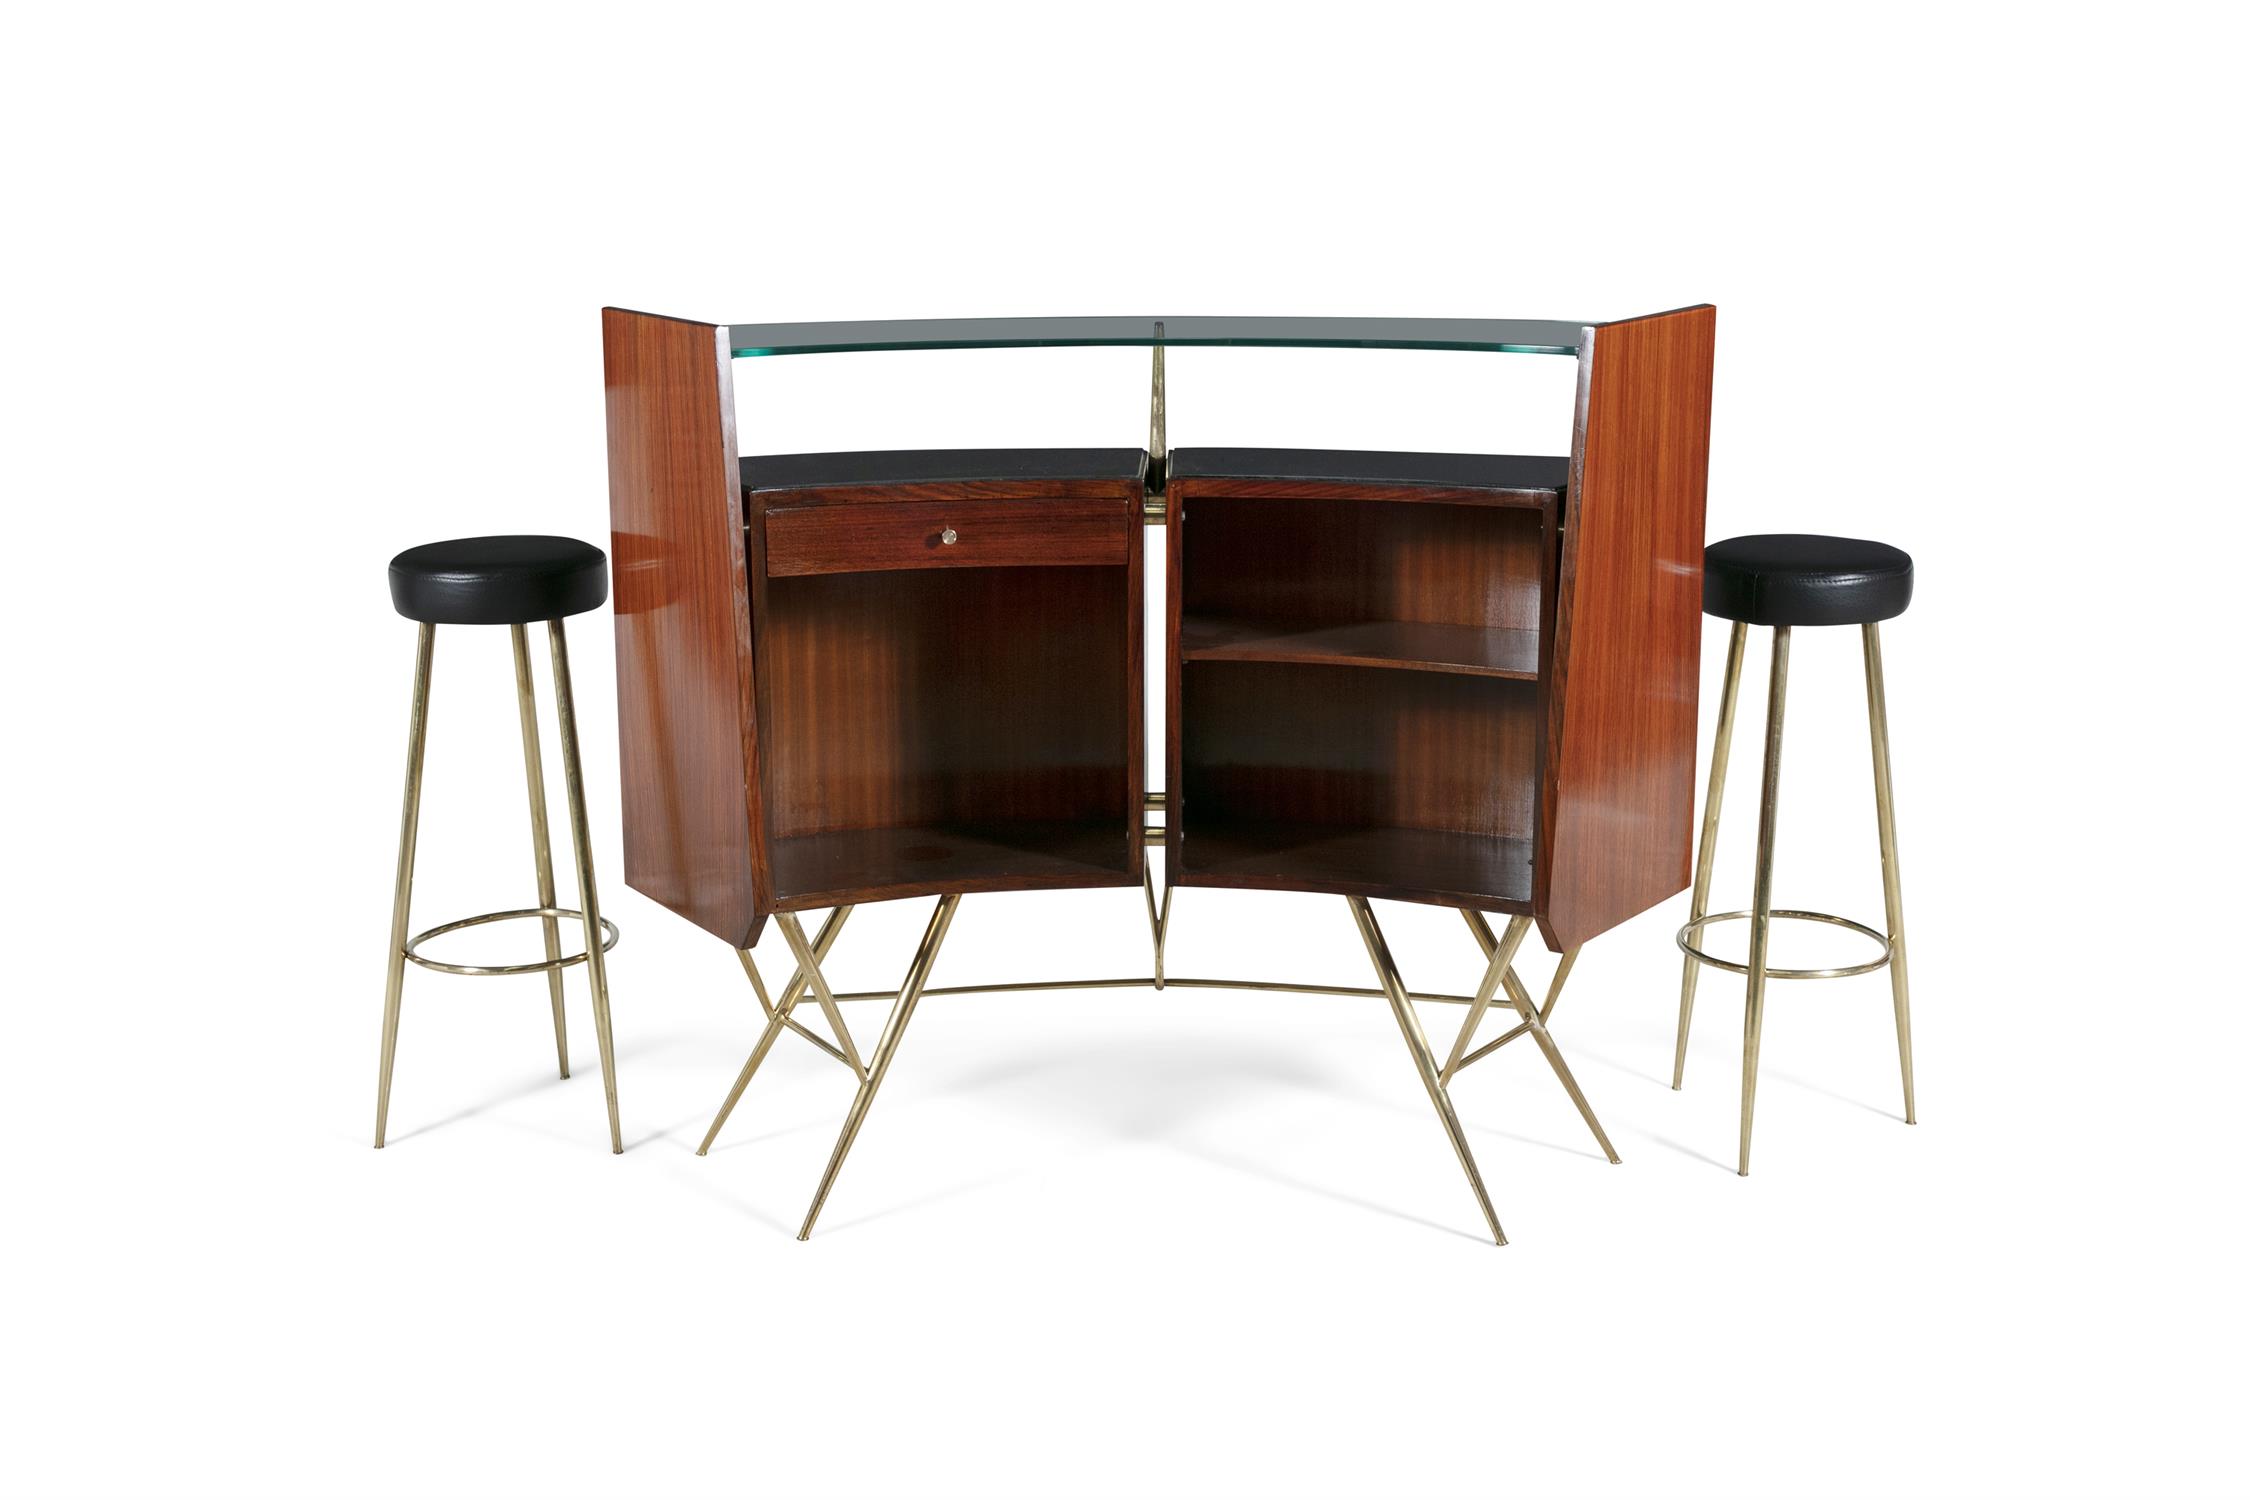 BAR SET A rosewood and brass bar set, complete with two stools and a curved glass top, Italy c. - Image 9 of 14